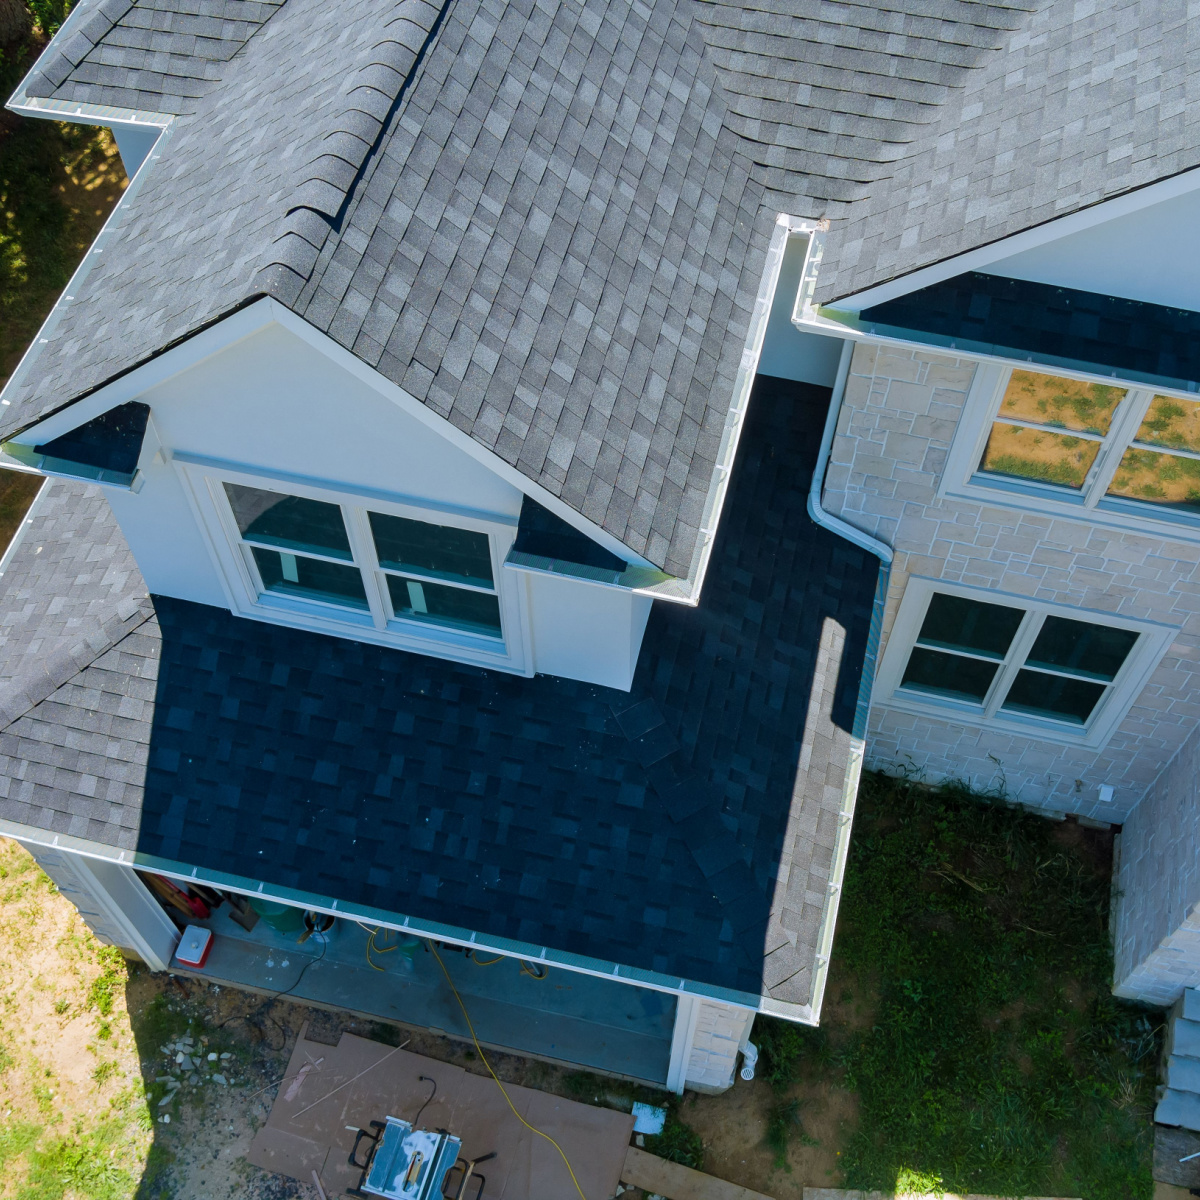 A home with a brand new Dallas roof replacement that will need a regular Dallas roof inspection to ensure that any Dallas roof damage is caught early.